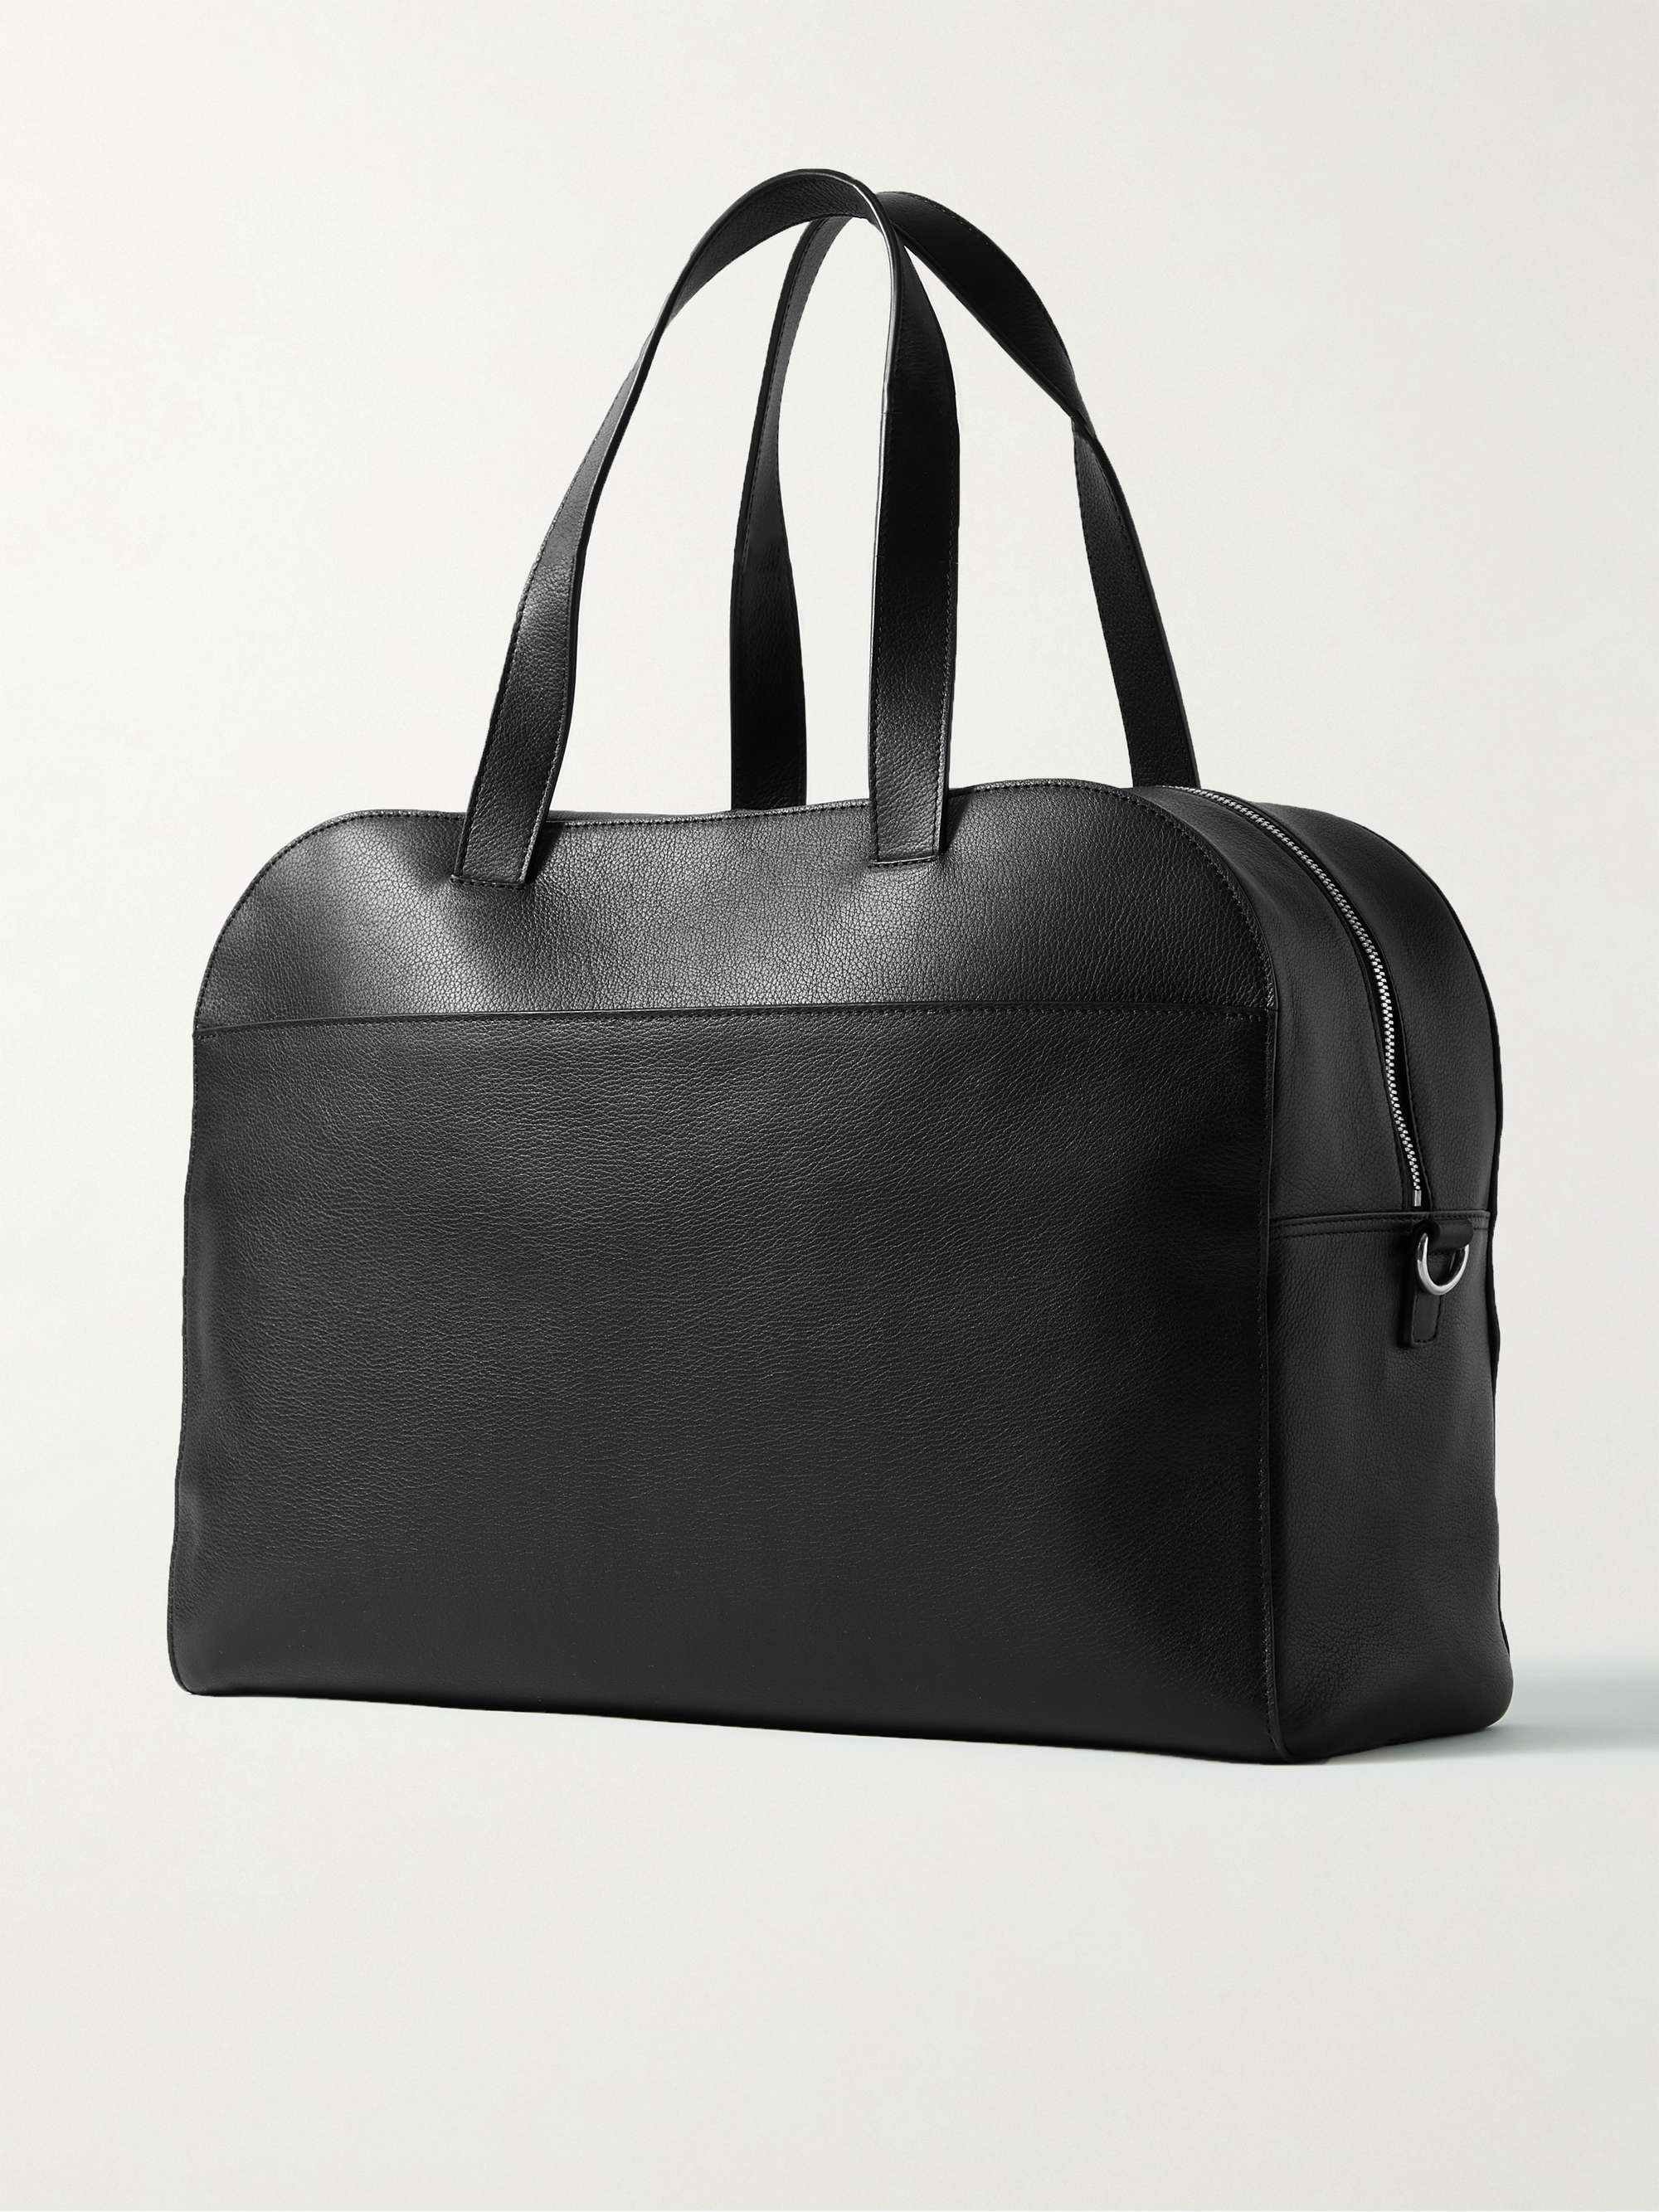 A.P.C. Full-Grain Leather Weekend Bag